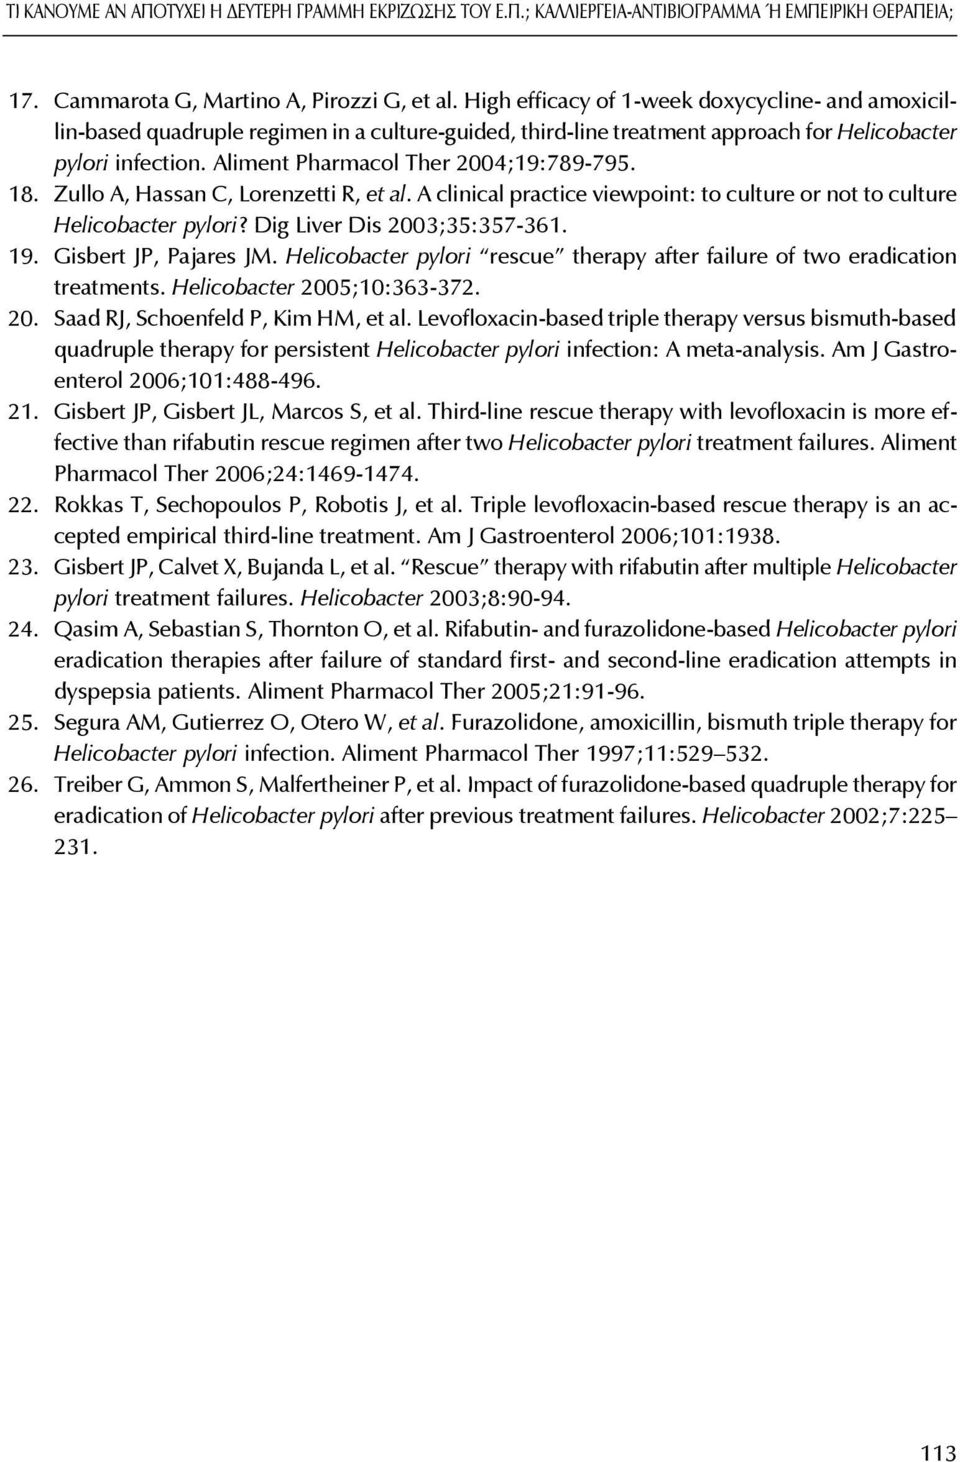 Aliment Pharmacol Ther 2004;19:789-795. 18. Zullo A, Hassan C, Lorenzetti R, et al. A clinical practice viewpoint: to culture or not to culture Helicobacter pylori? Dig Liver Dis 2003;35:357-361. 19.